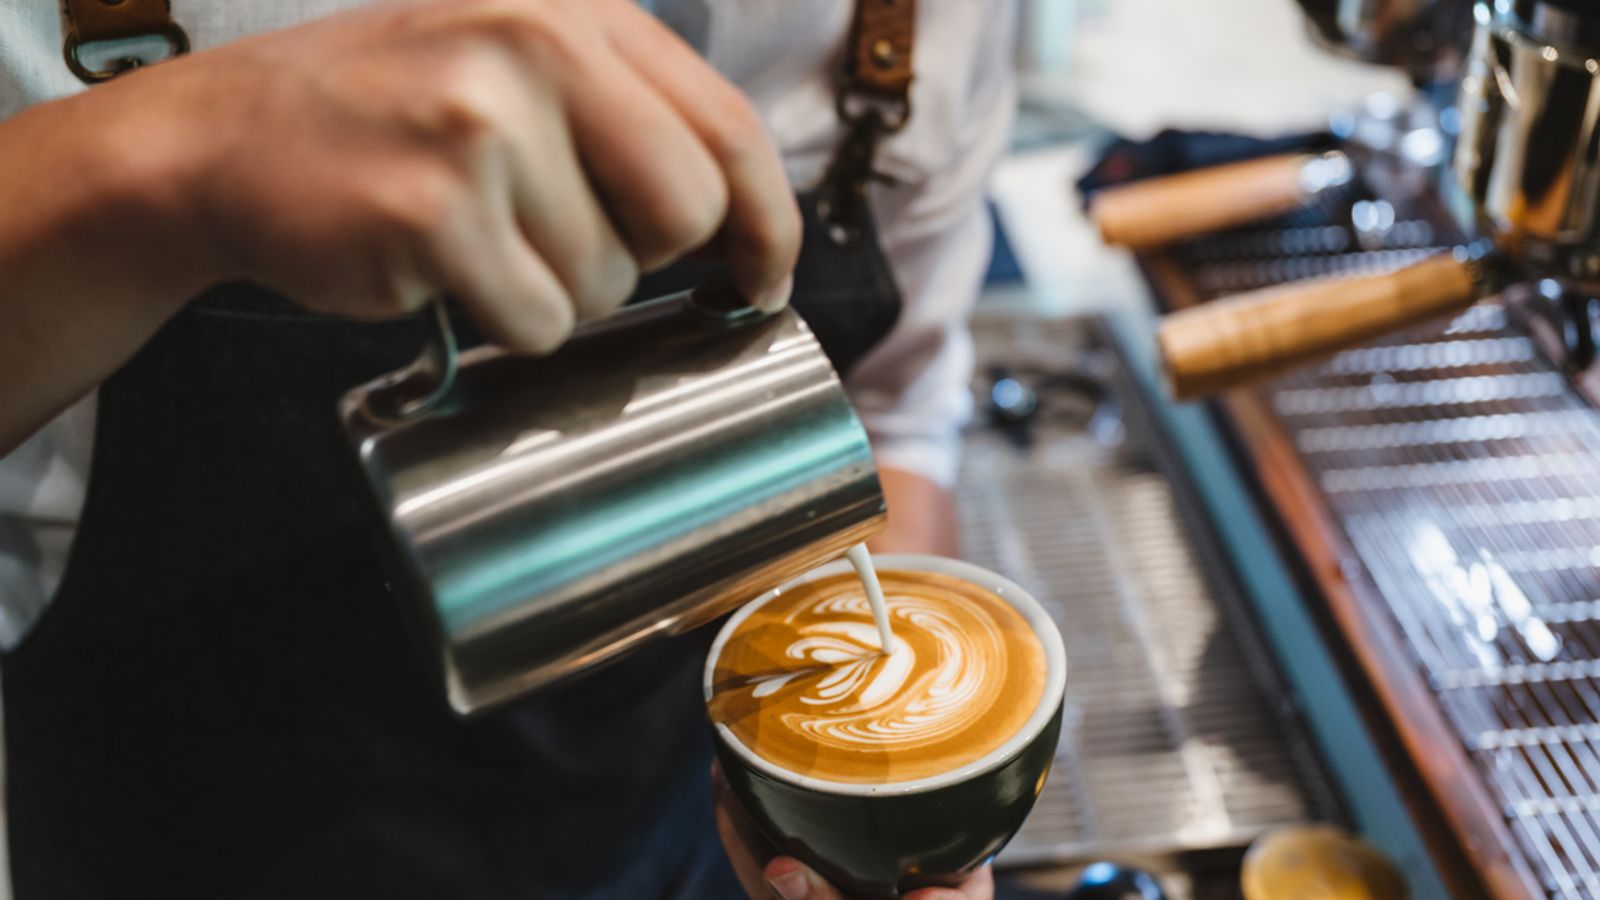 Revealed: Which chains put a 'massive' amount of caffeine in their coffees... and which don't